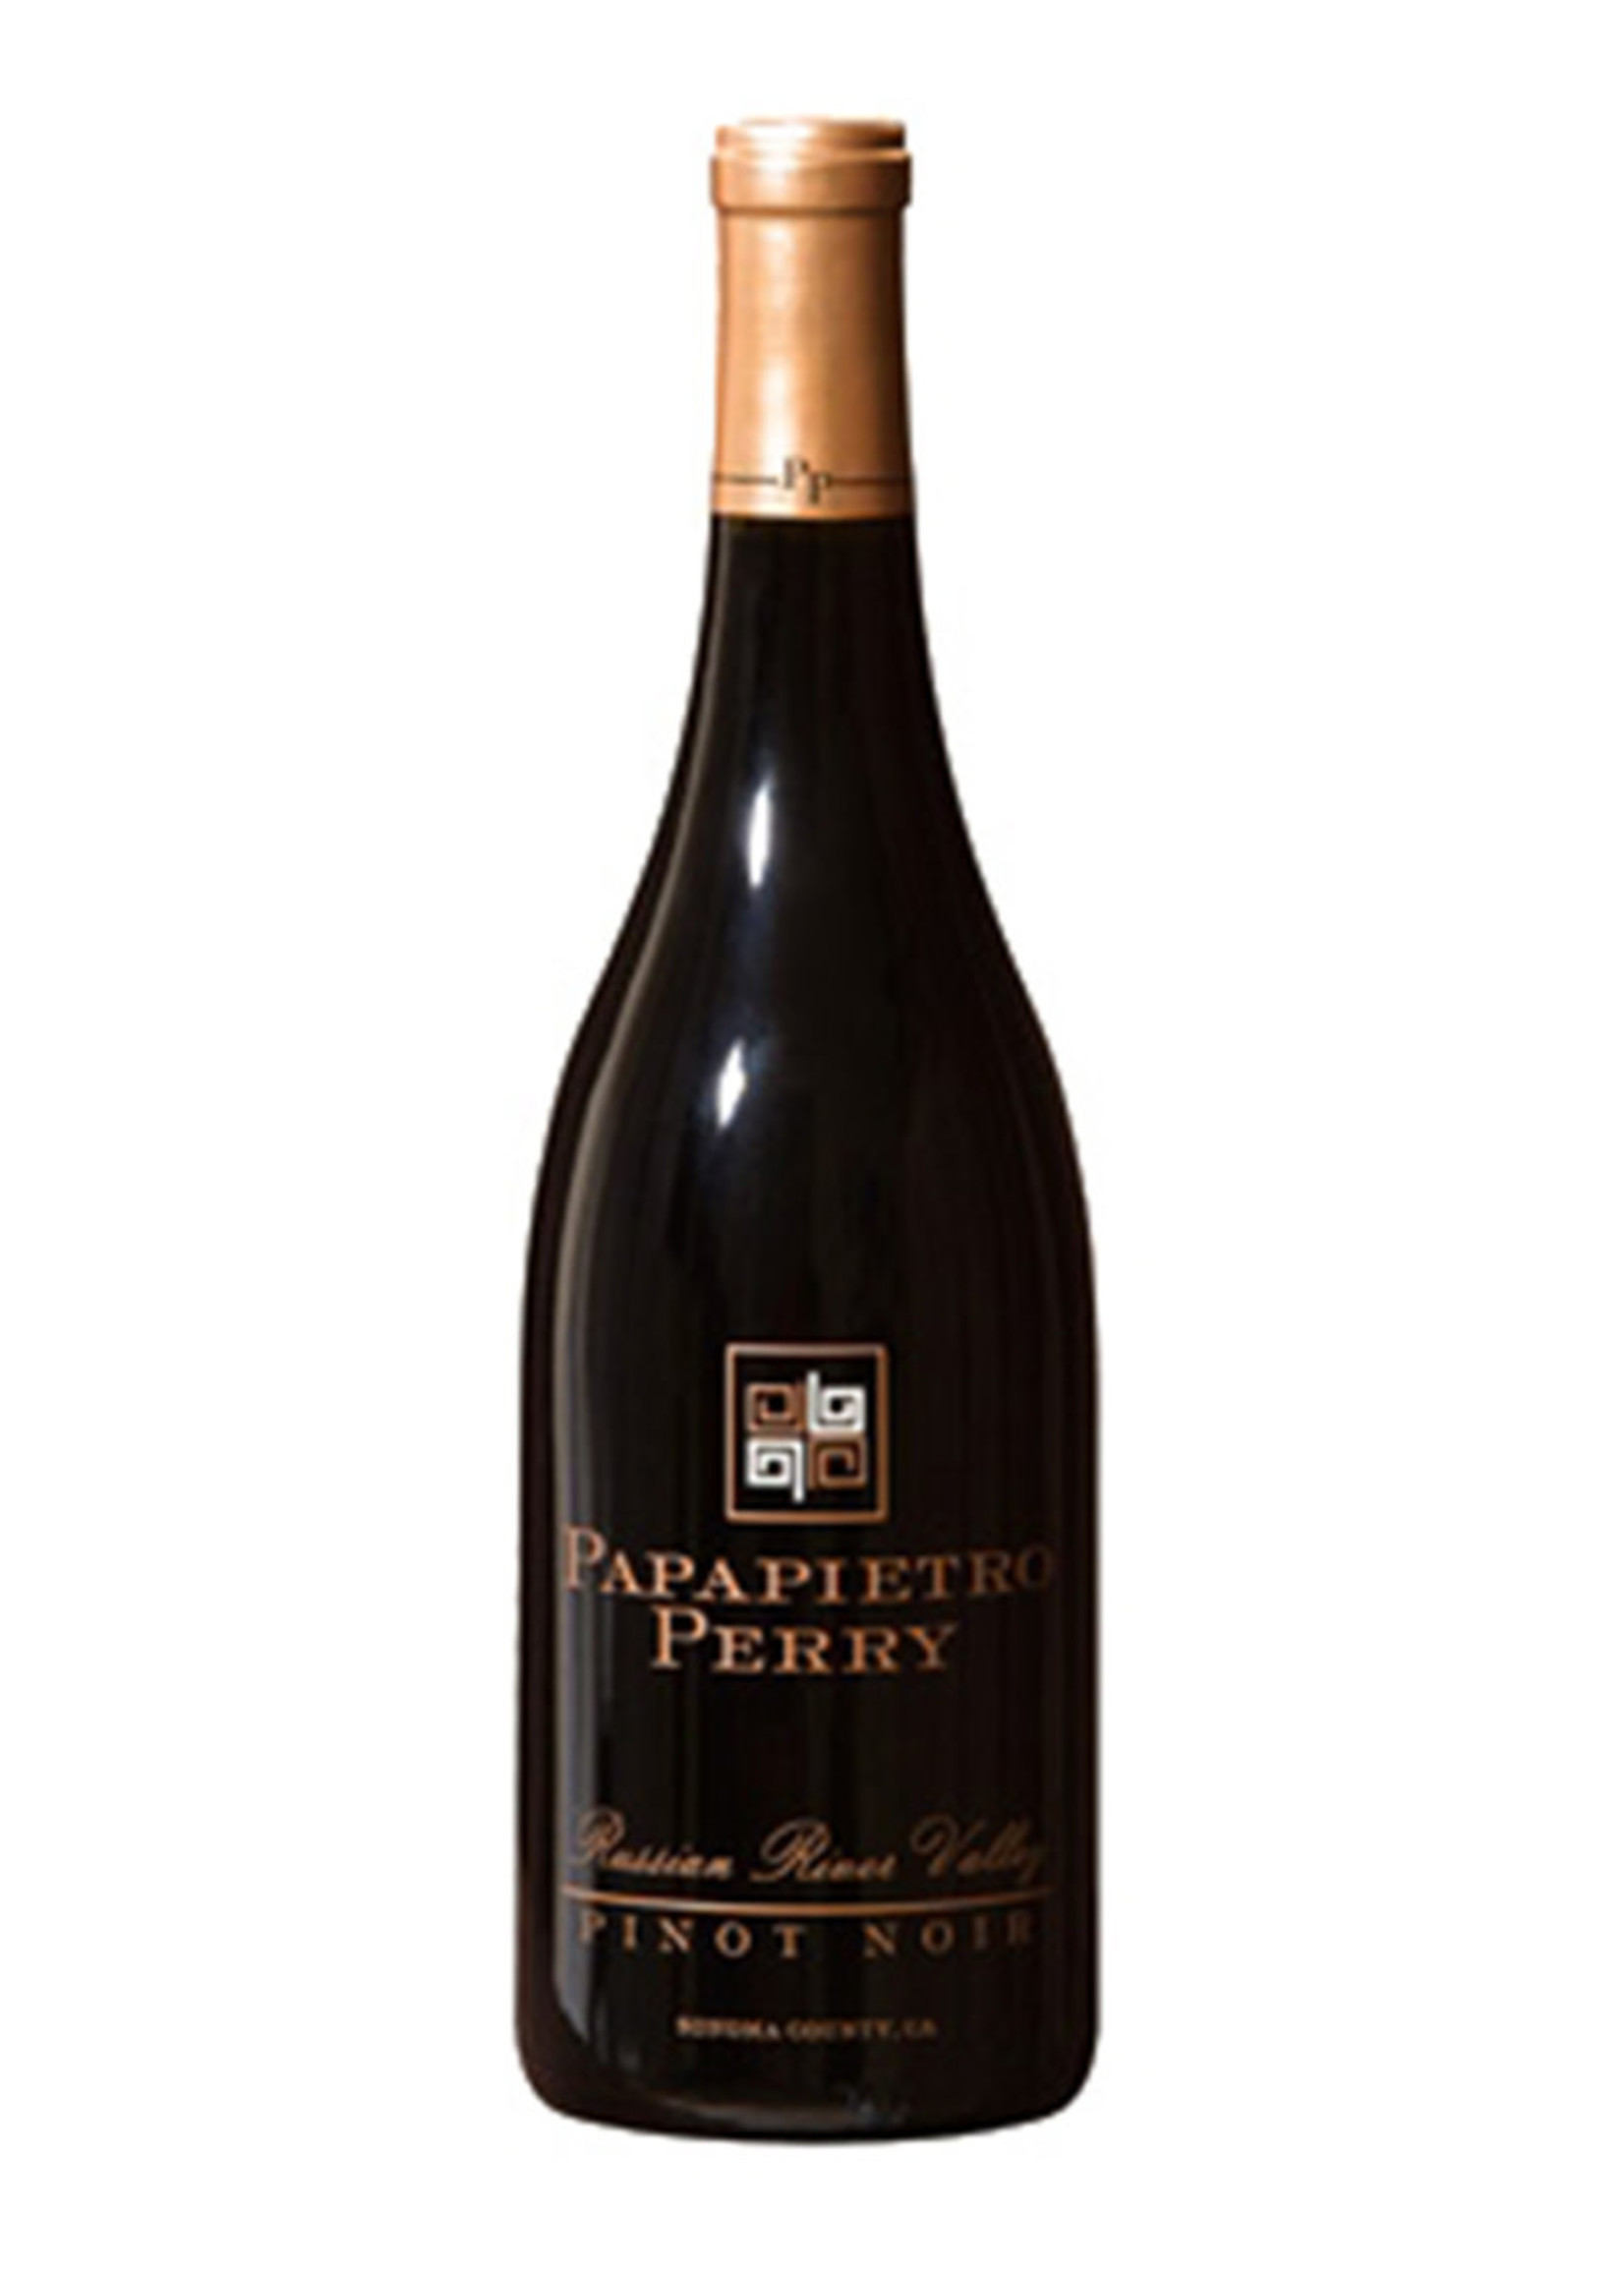 Papapietro Perry 2017 Pinot Noir, Russian River Valley, Sonoma Country, California